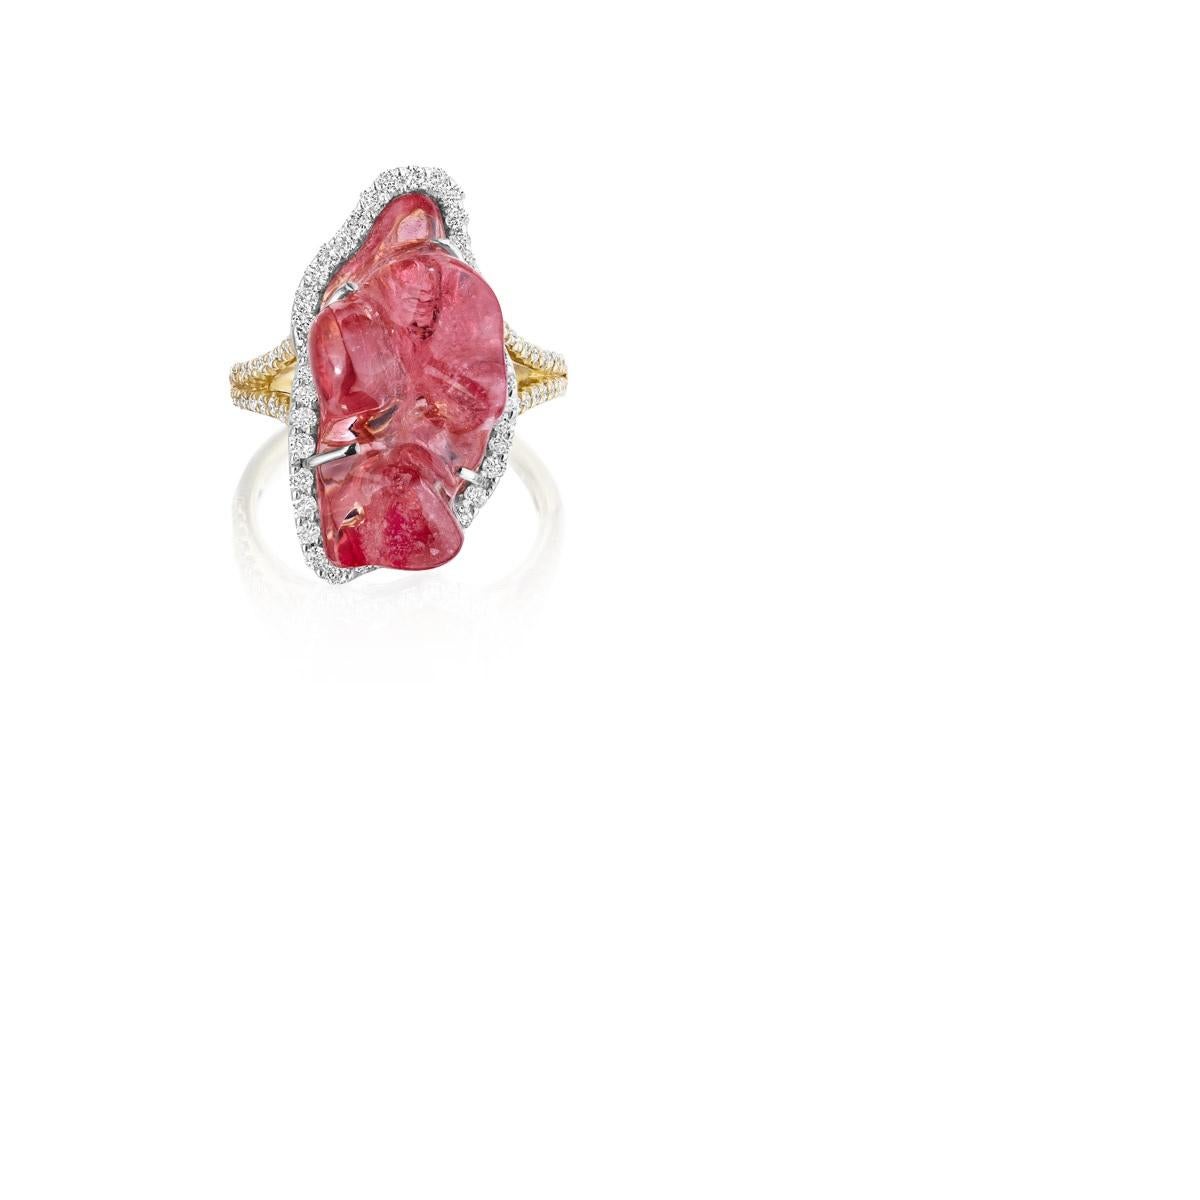 An American Contemporary 18 karat rose gold ring with a natural formation pink spinel by Kimberly McDonald. The ring has a natural pink spinel set in pavé diamonds. Modern.

Size: this ring is size 7. It can be sized.

Signed, KMD. 